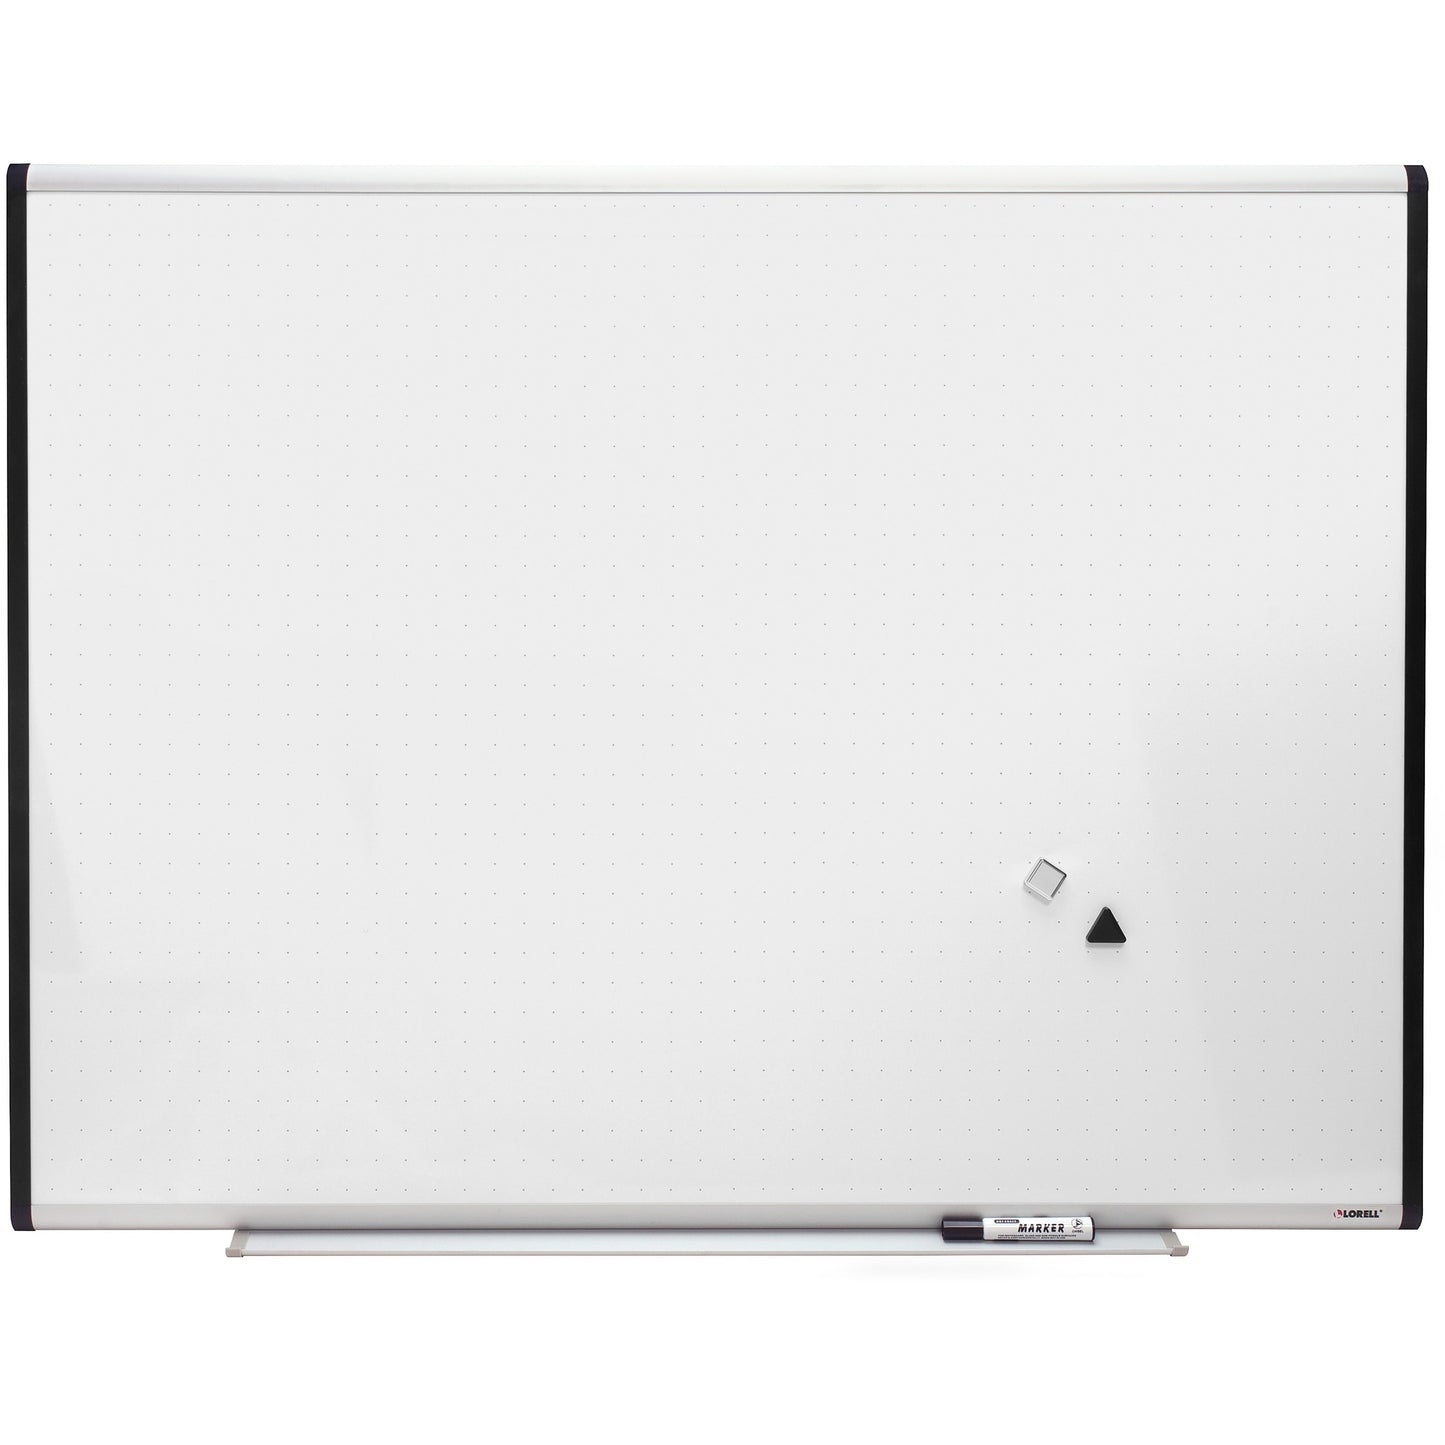 Lorell Magnetic Dry-erase Grid Lines Marker Board